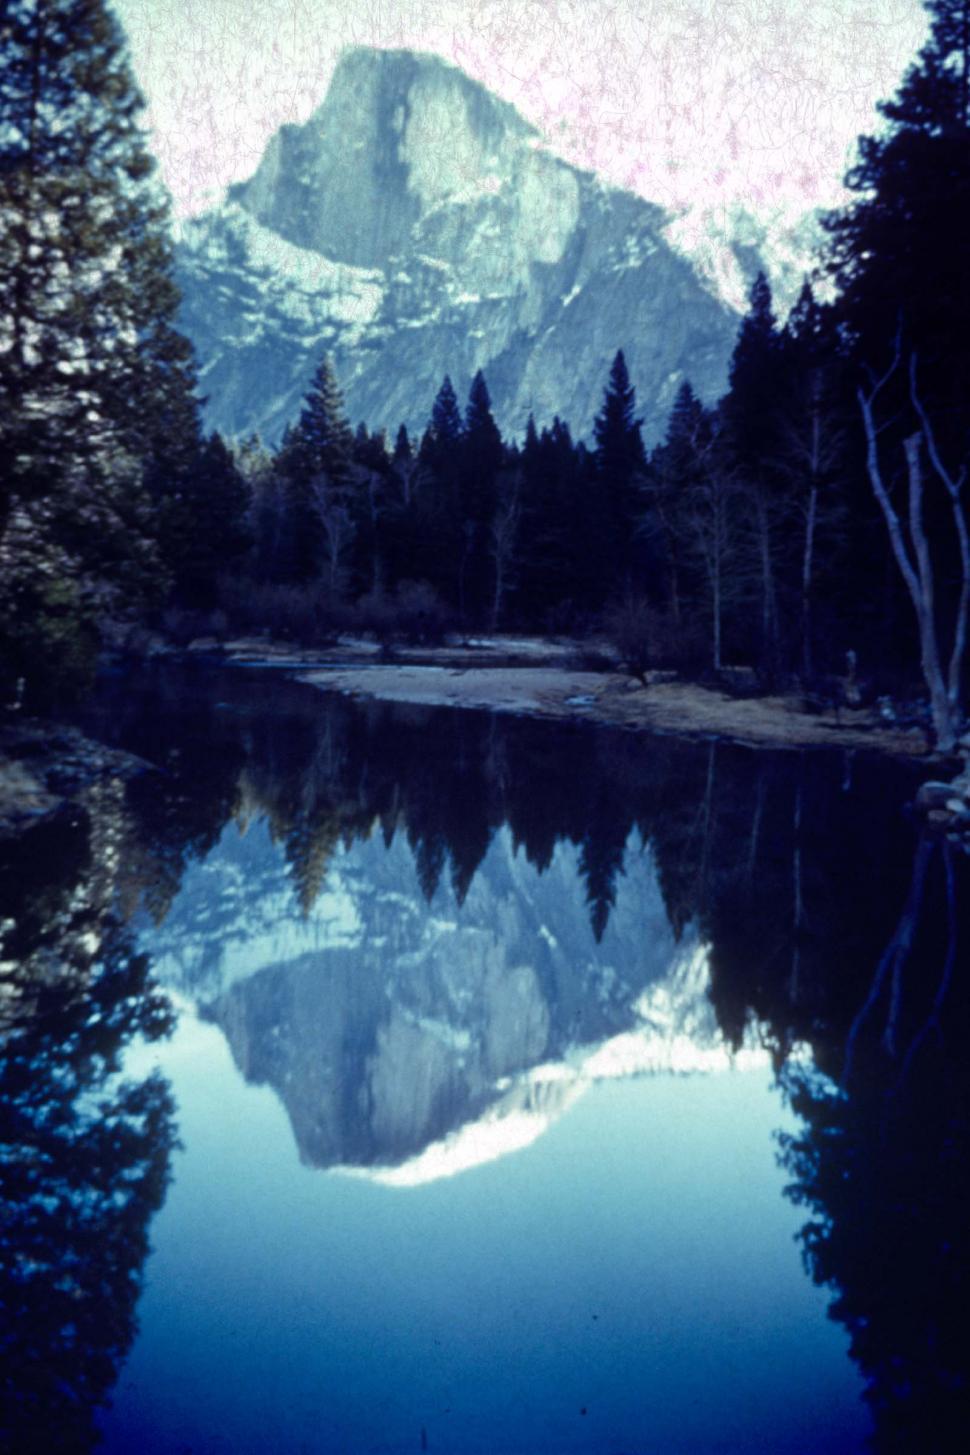 Free Image of Mountain Reflecting in Still Lake 